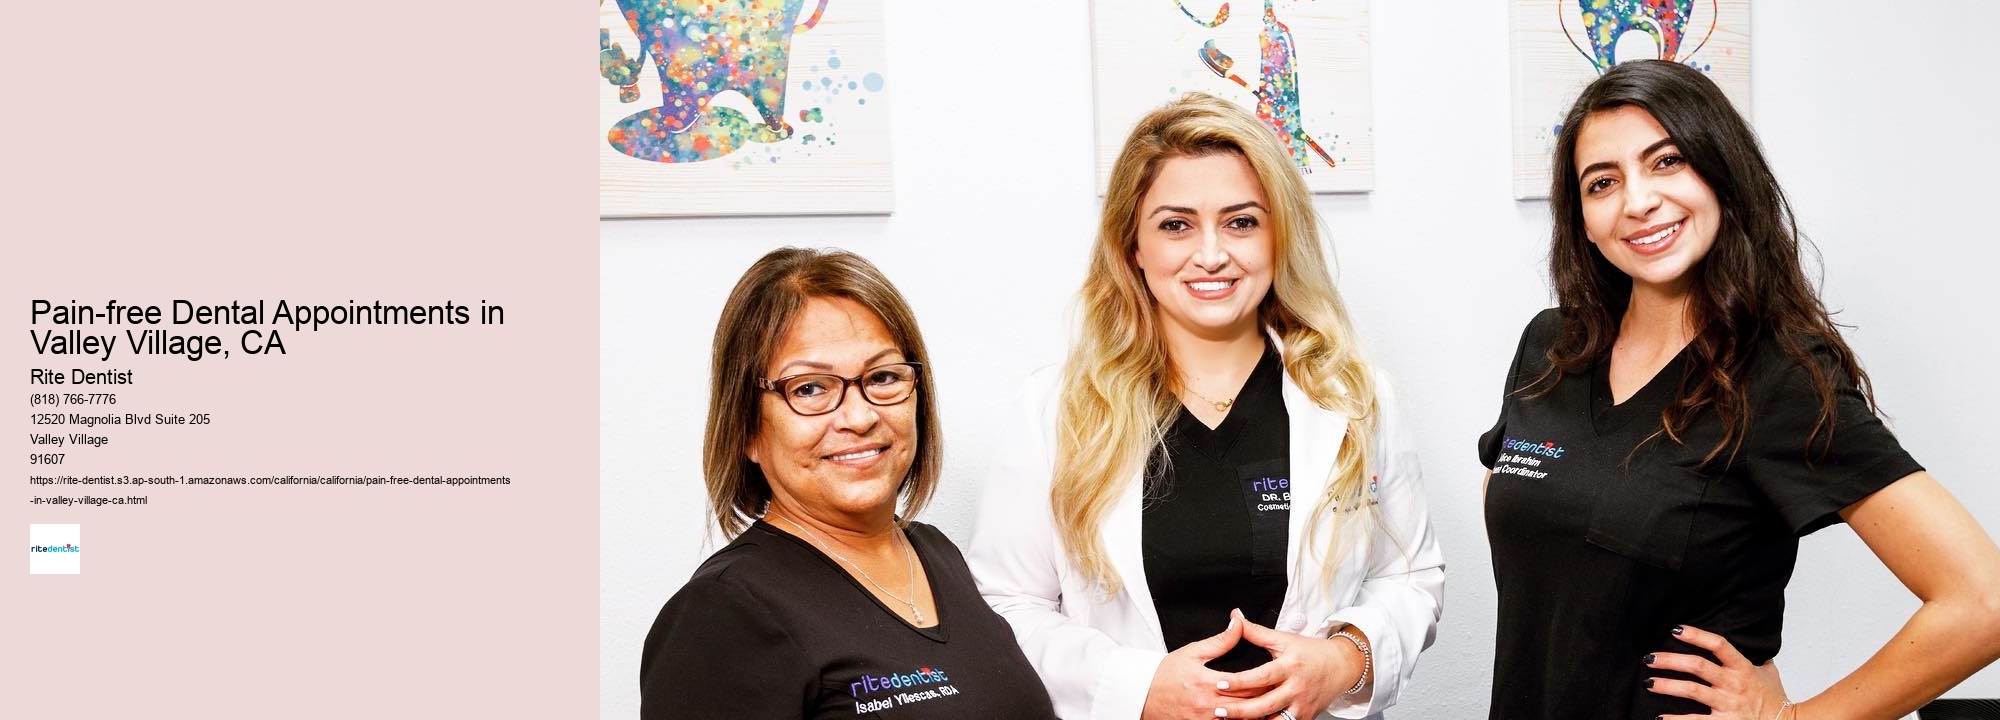 Pain-free Dental Appointments in Valley Village, CA